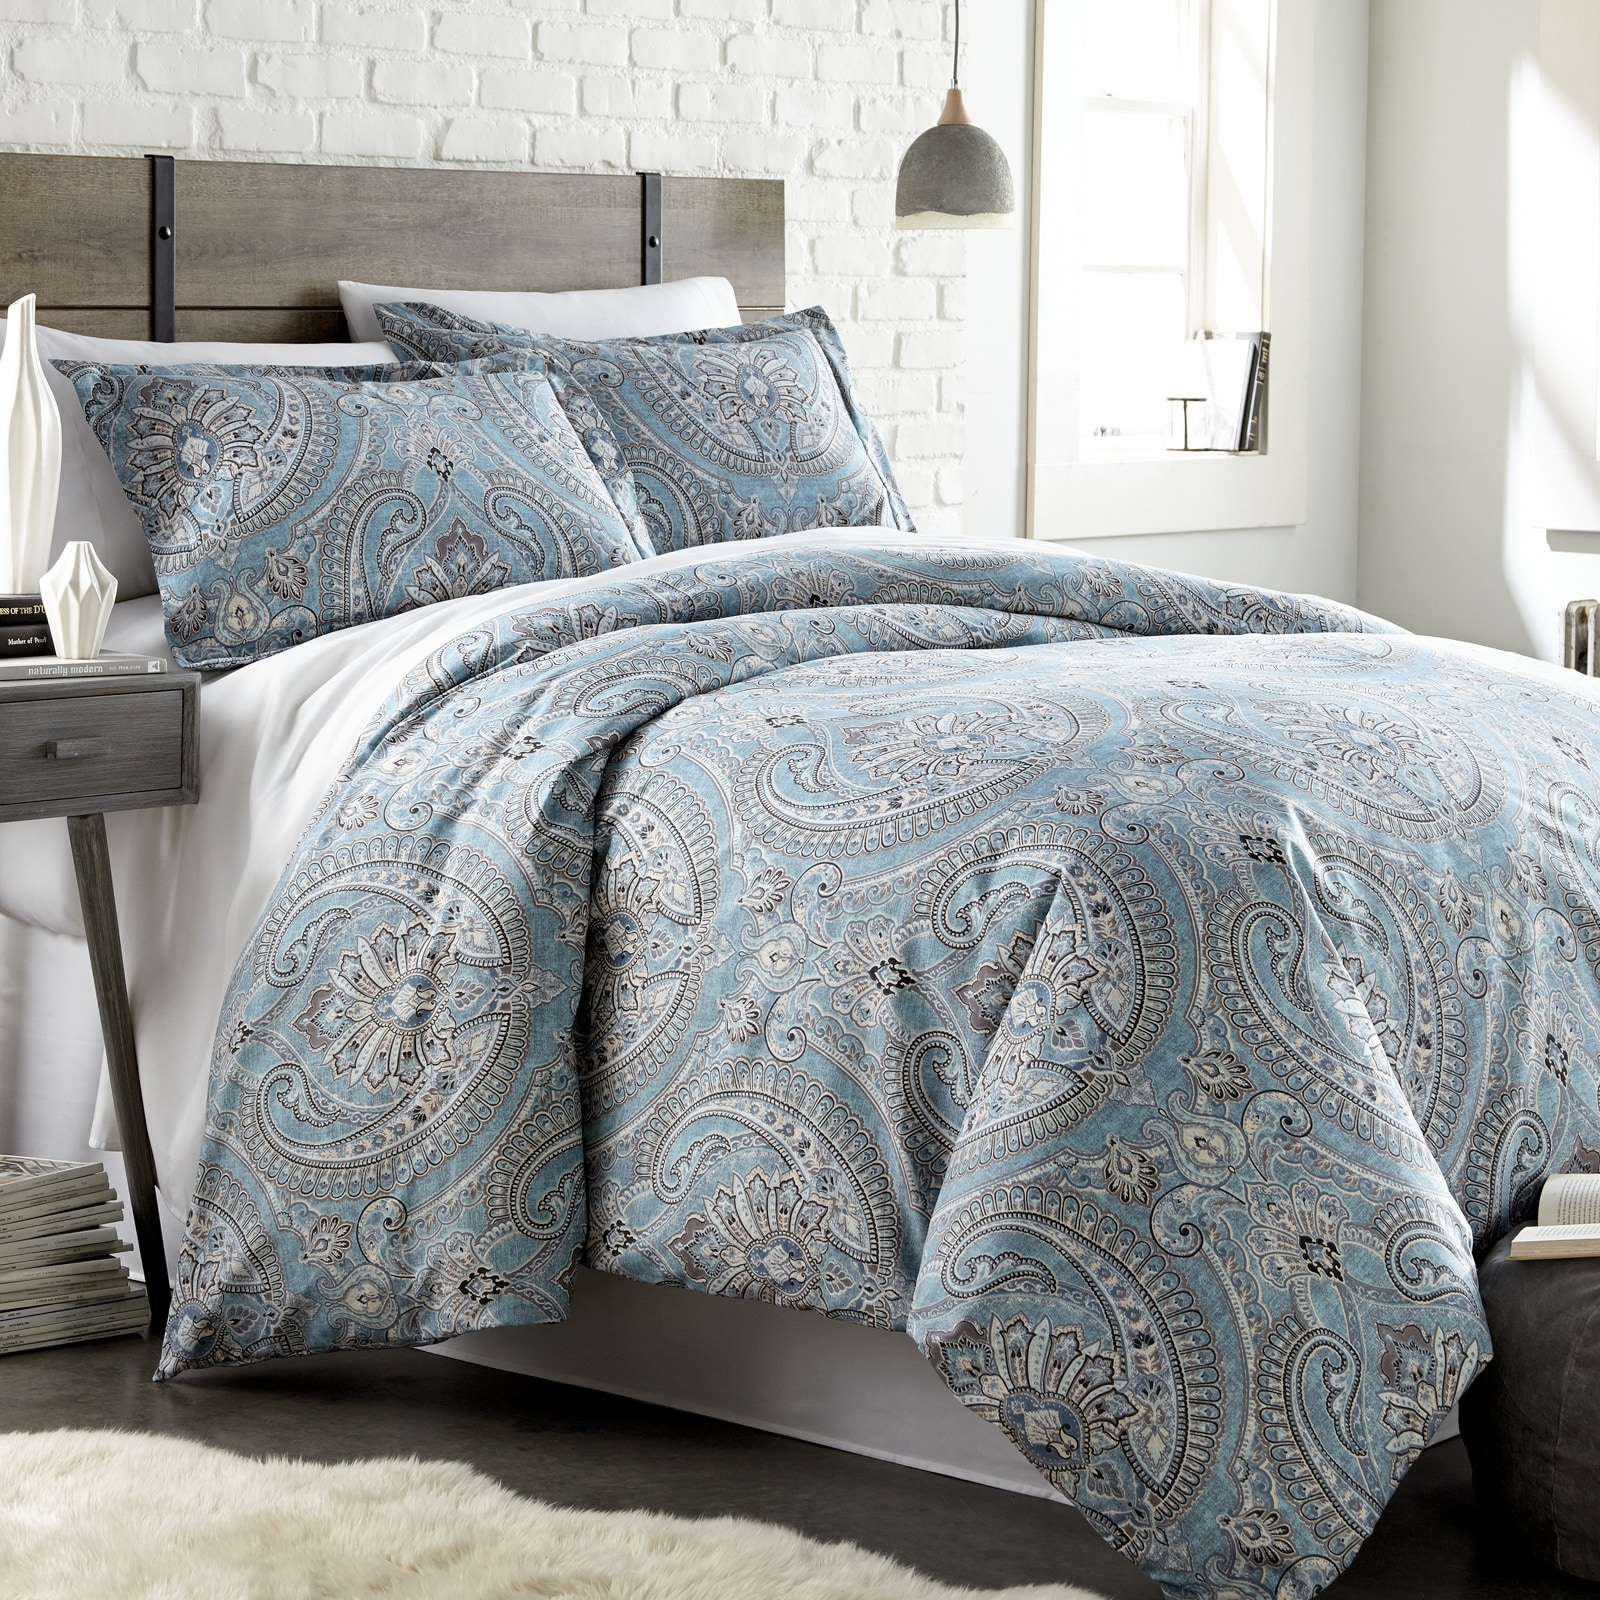 Shabby Chic, Paisley Comforters and Sets - Bed Bath & Beyond